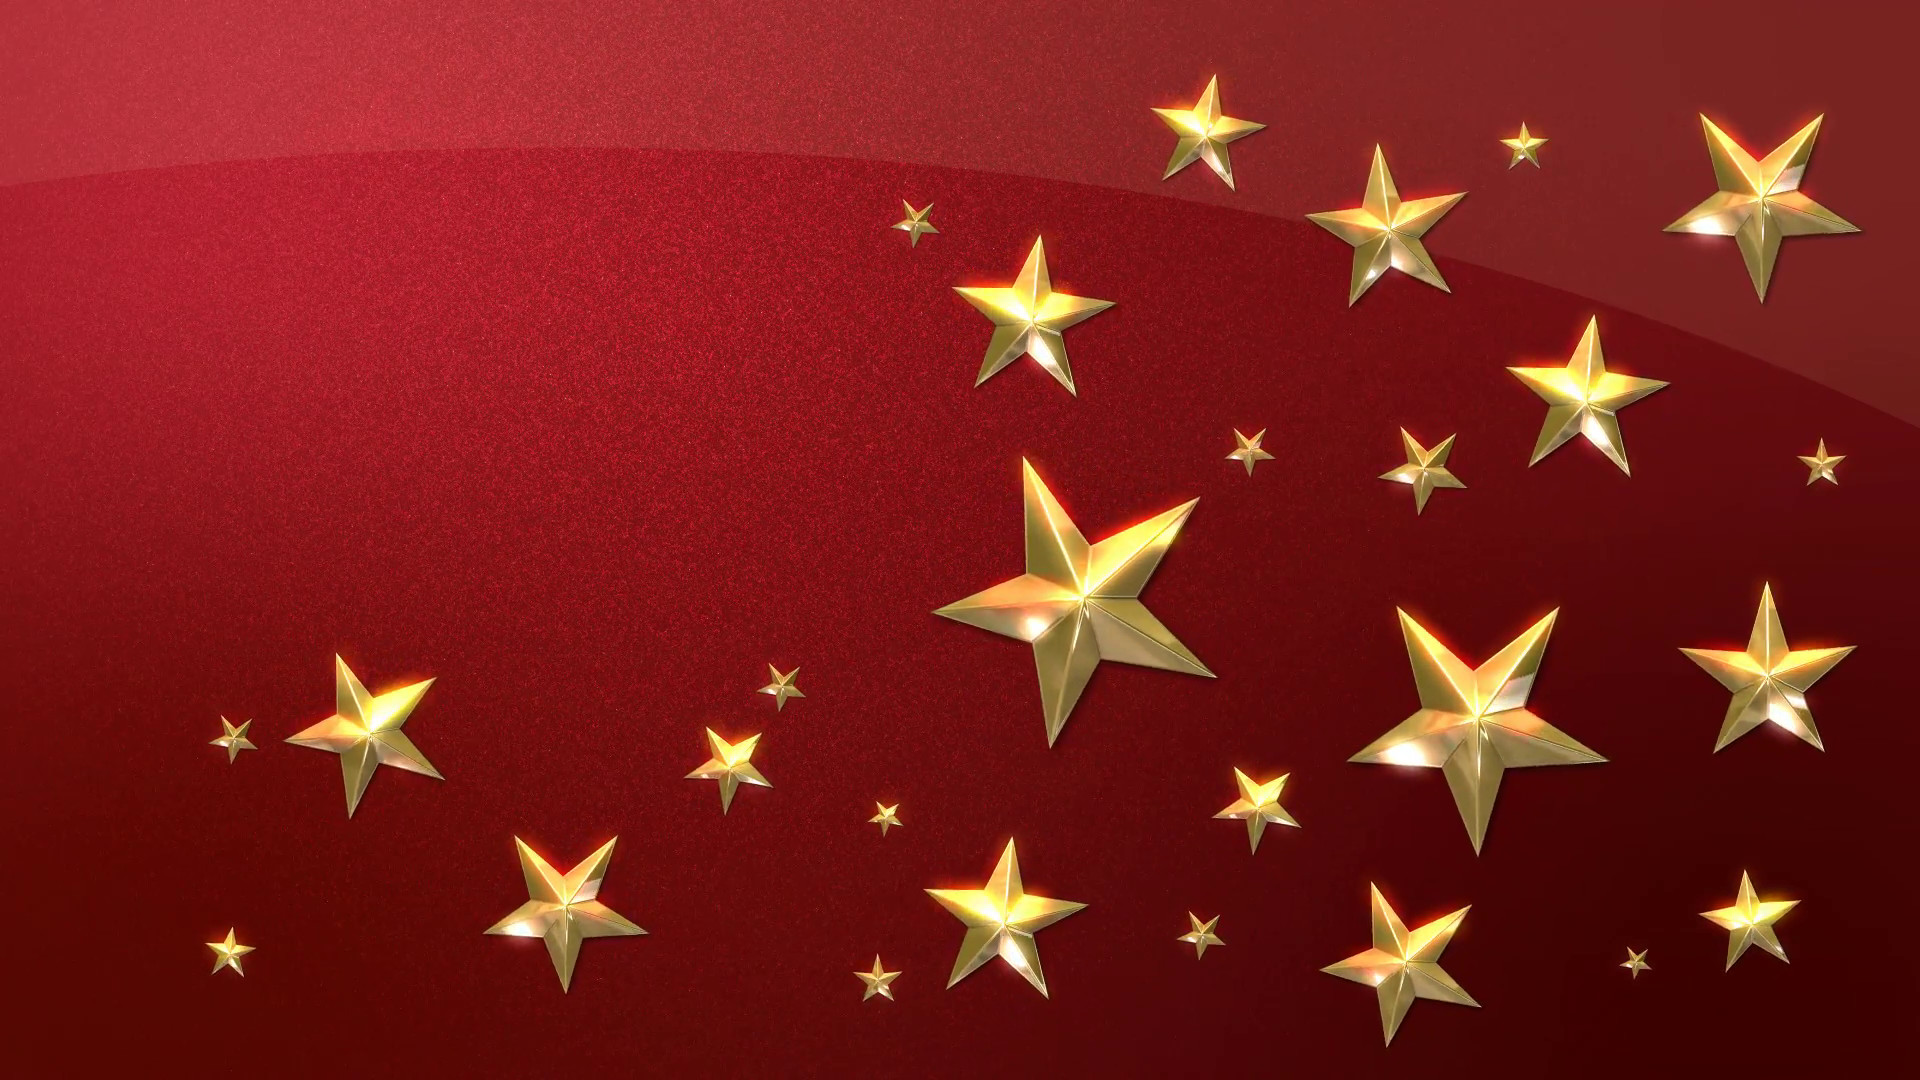 1920x1080 Subscription Library Looping Animation of Festive Gold Stars on a Sparkling  Red Background